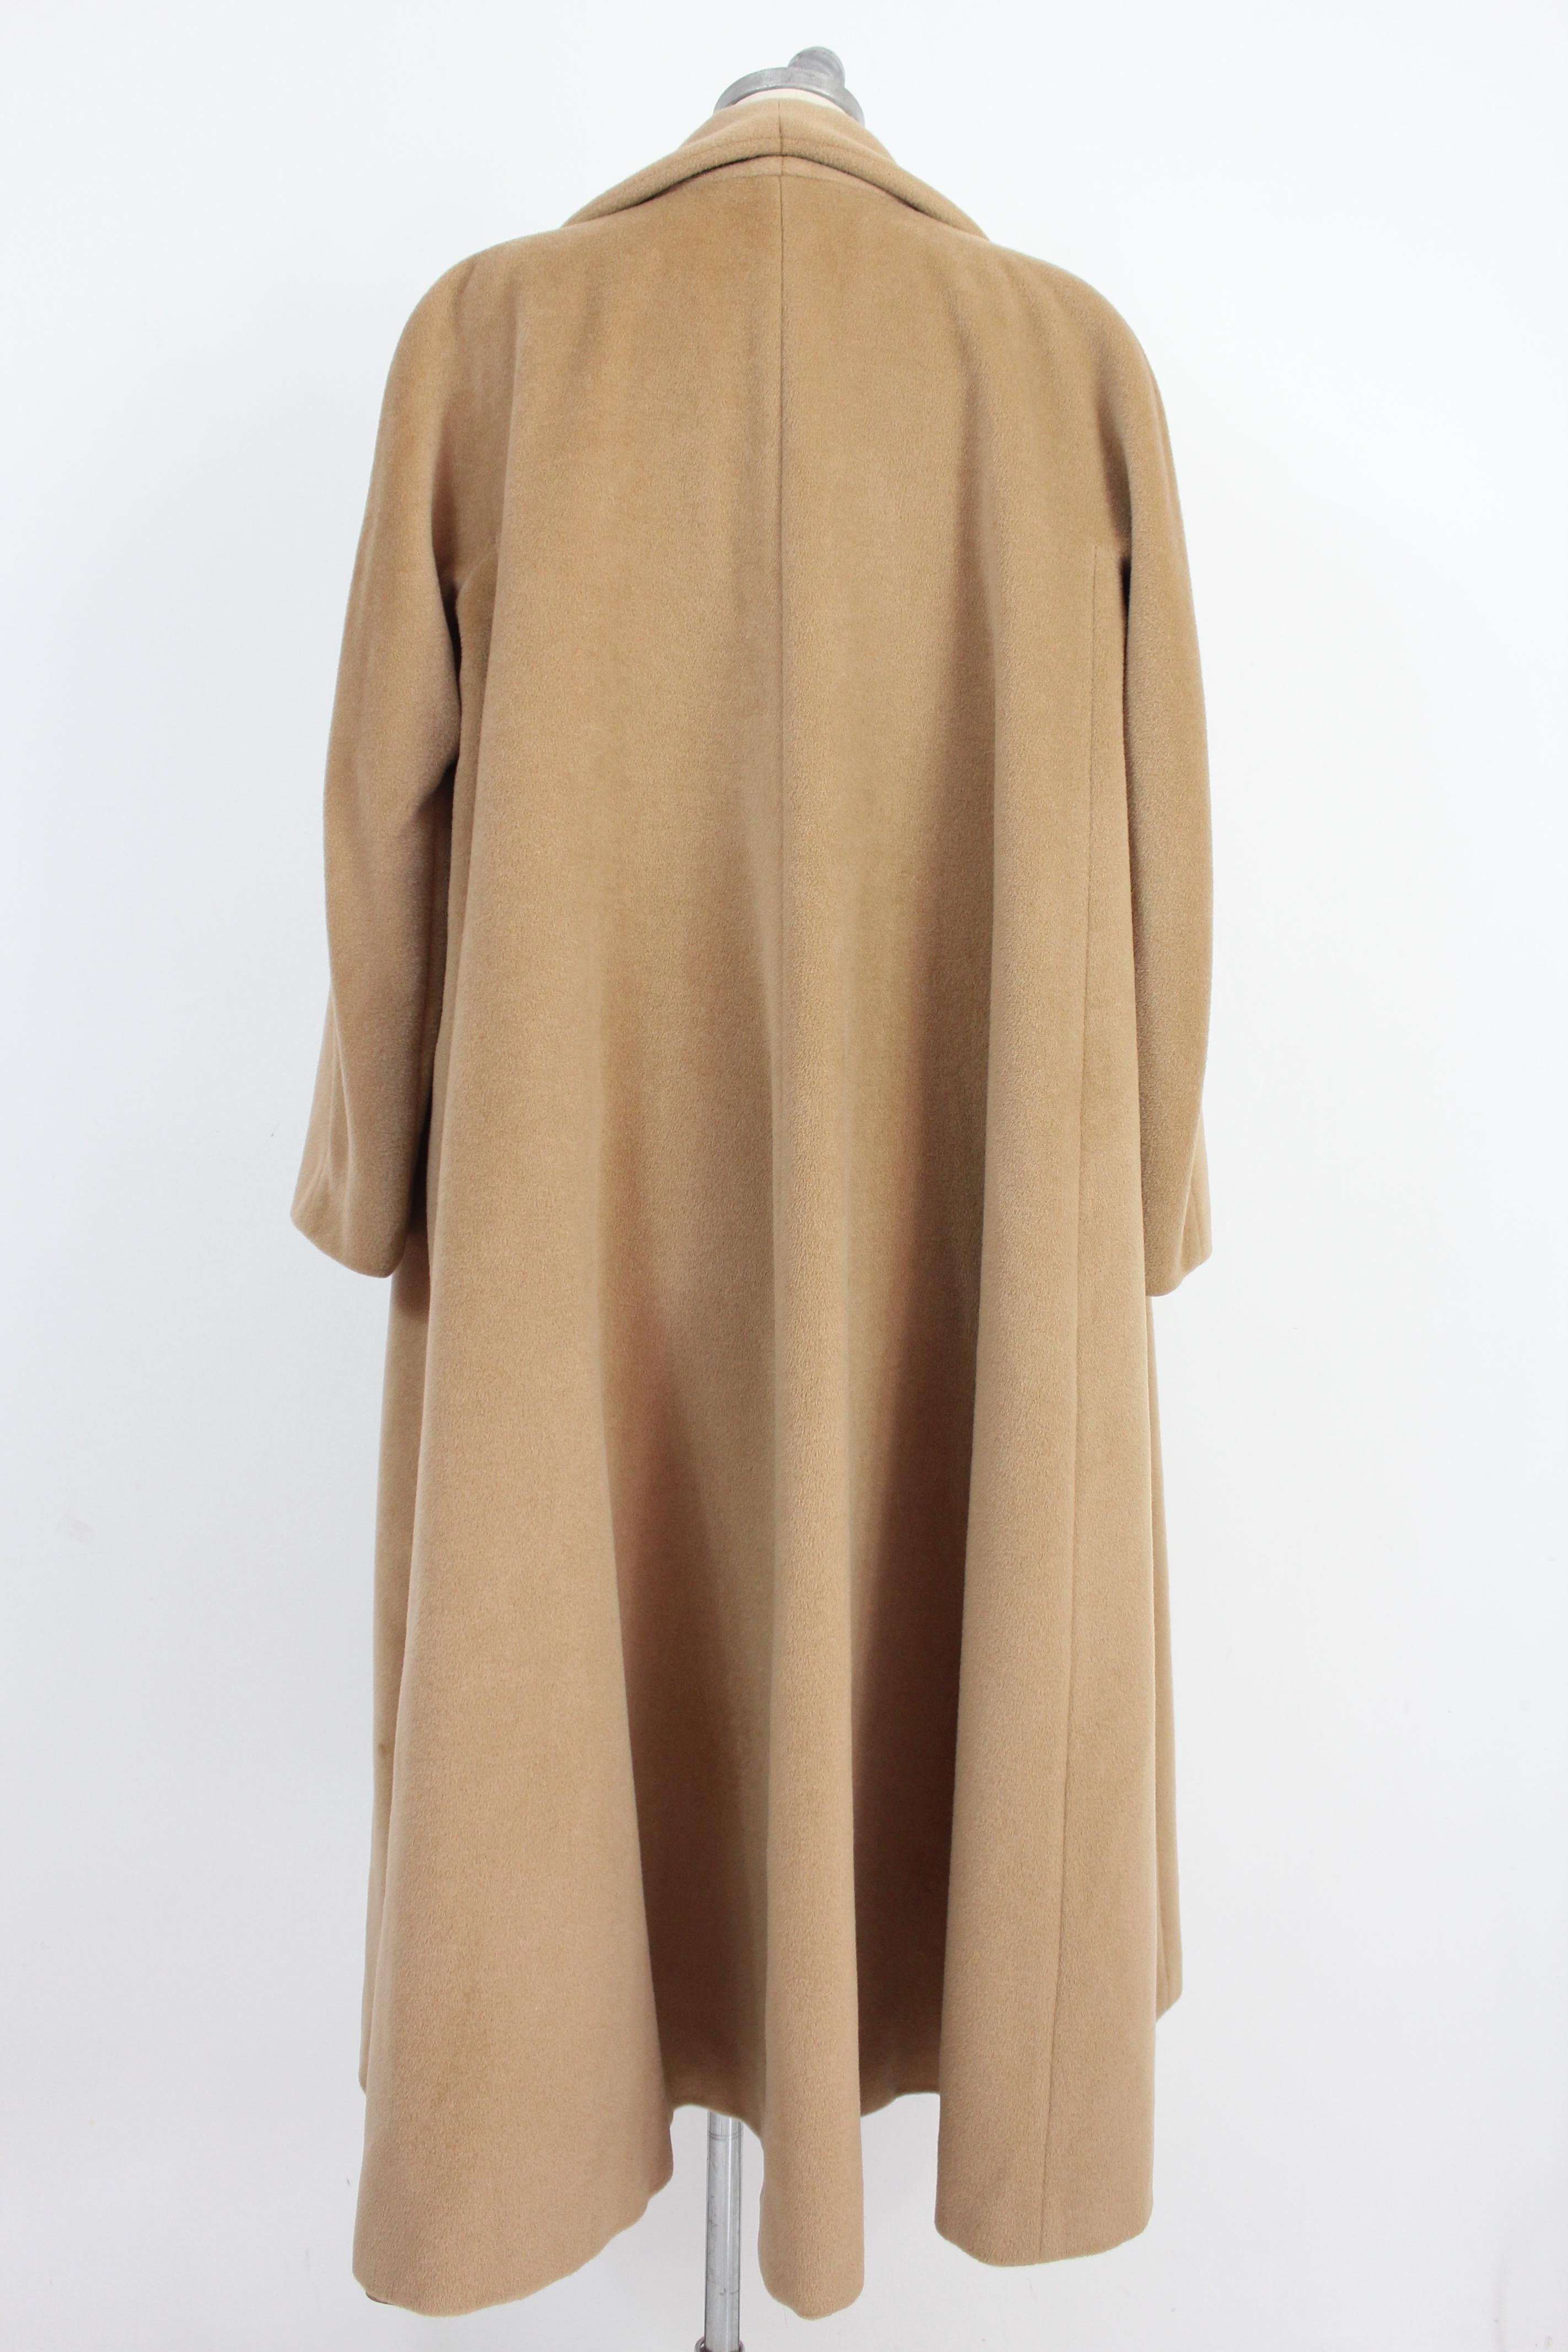 Max Mara 90s vintage women's coat. Long coat, oversized model. Beige color, 80% wool 20% cashmere fabric, internally lined 100% viscose. Made in Italy.

Condition: Very good.

This item is preloved and remains to be in a very good condition. There